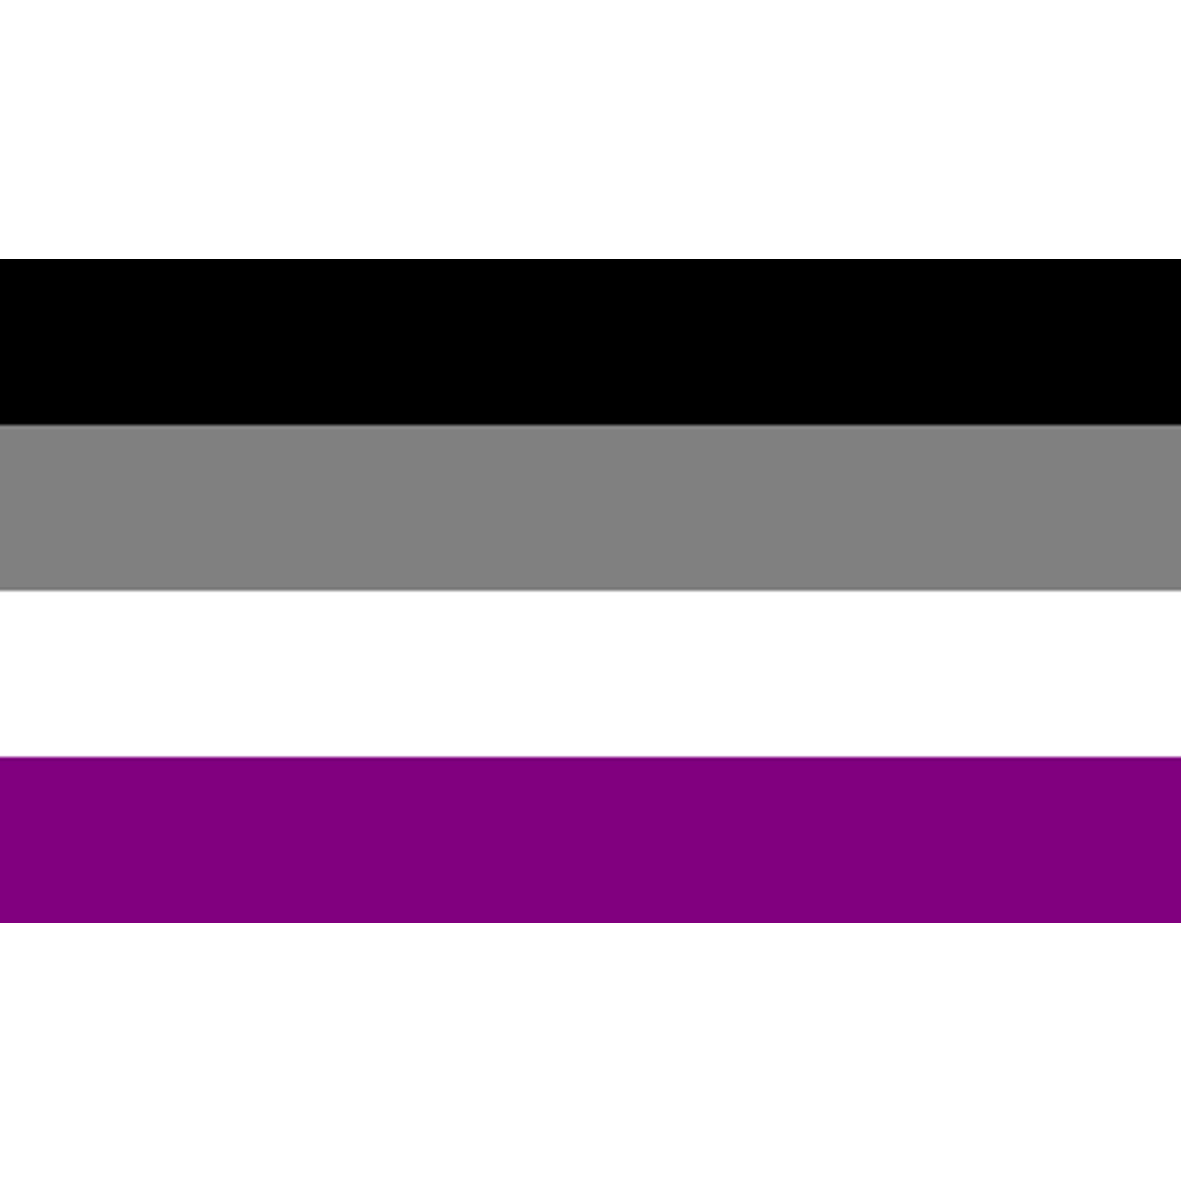 5' Asexual Flag.